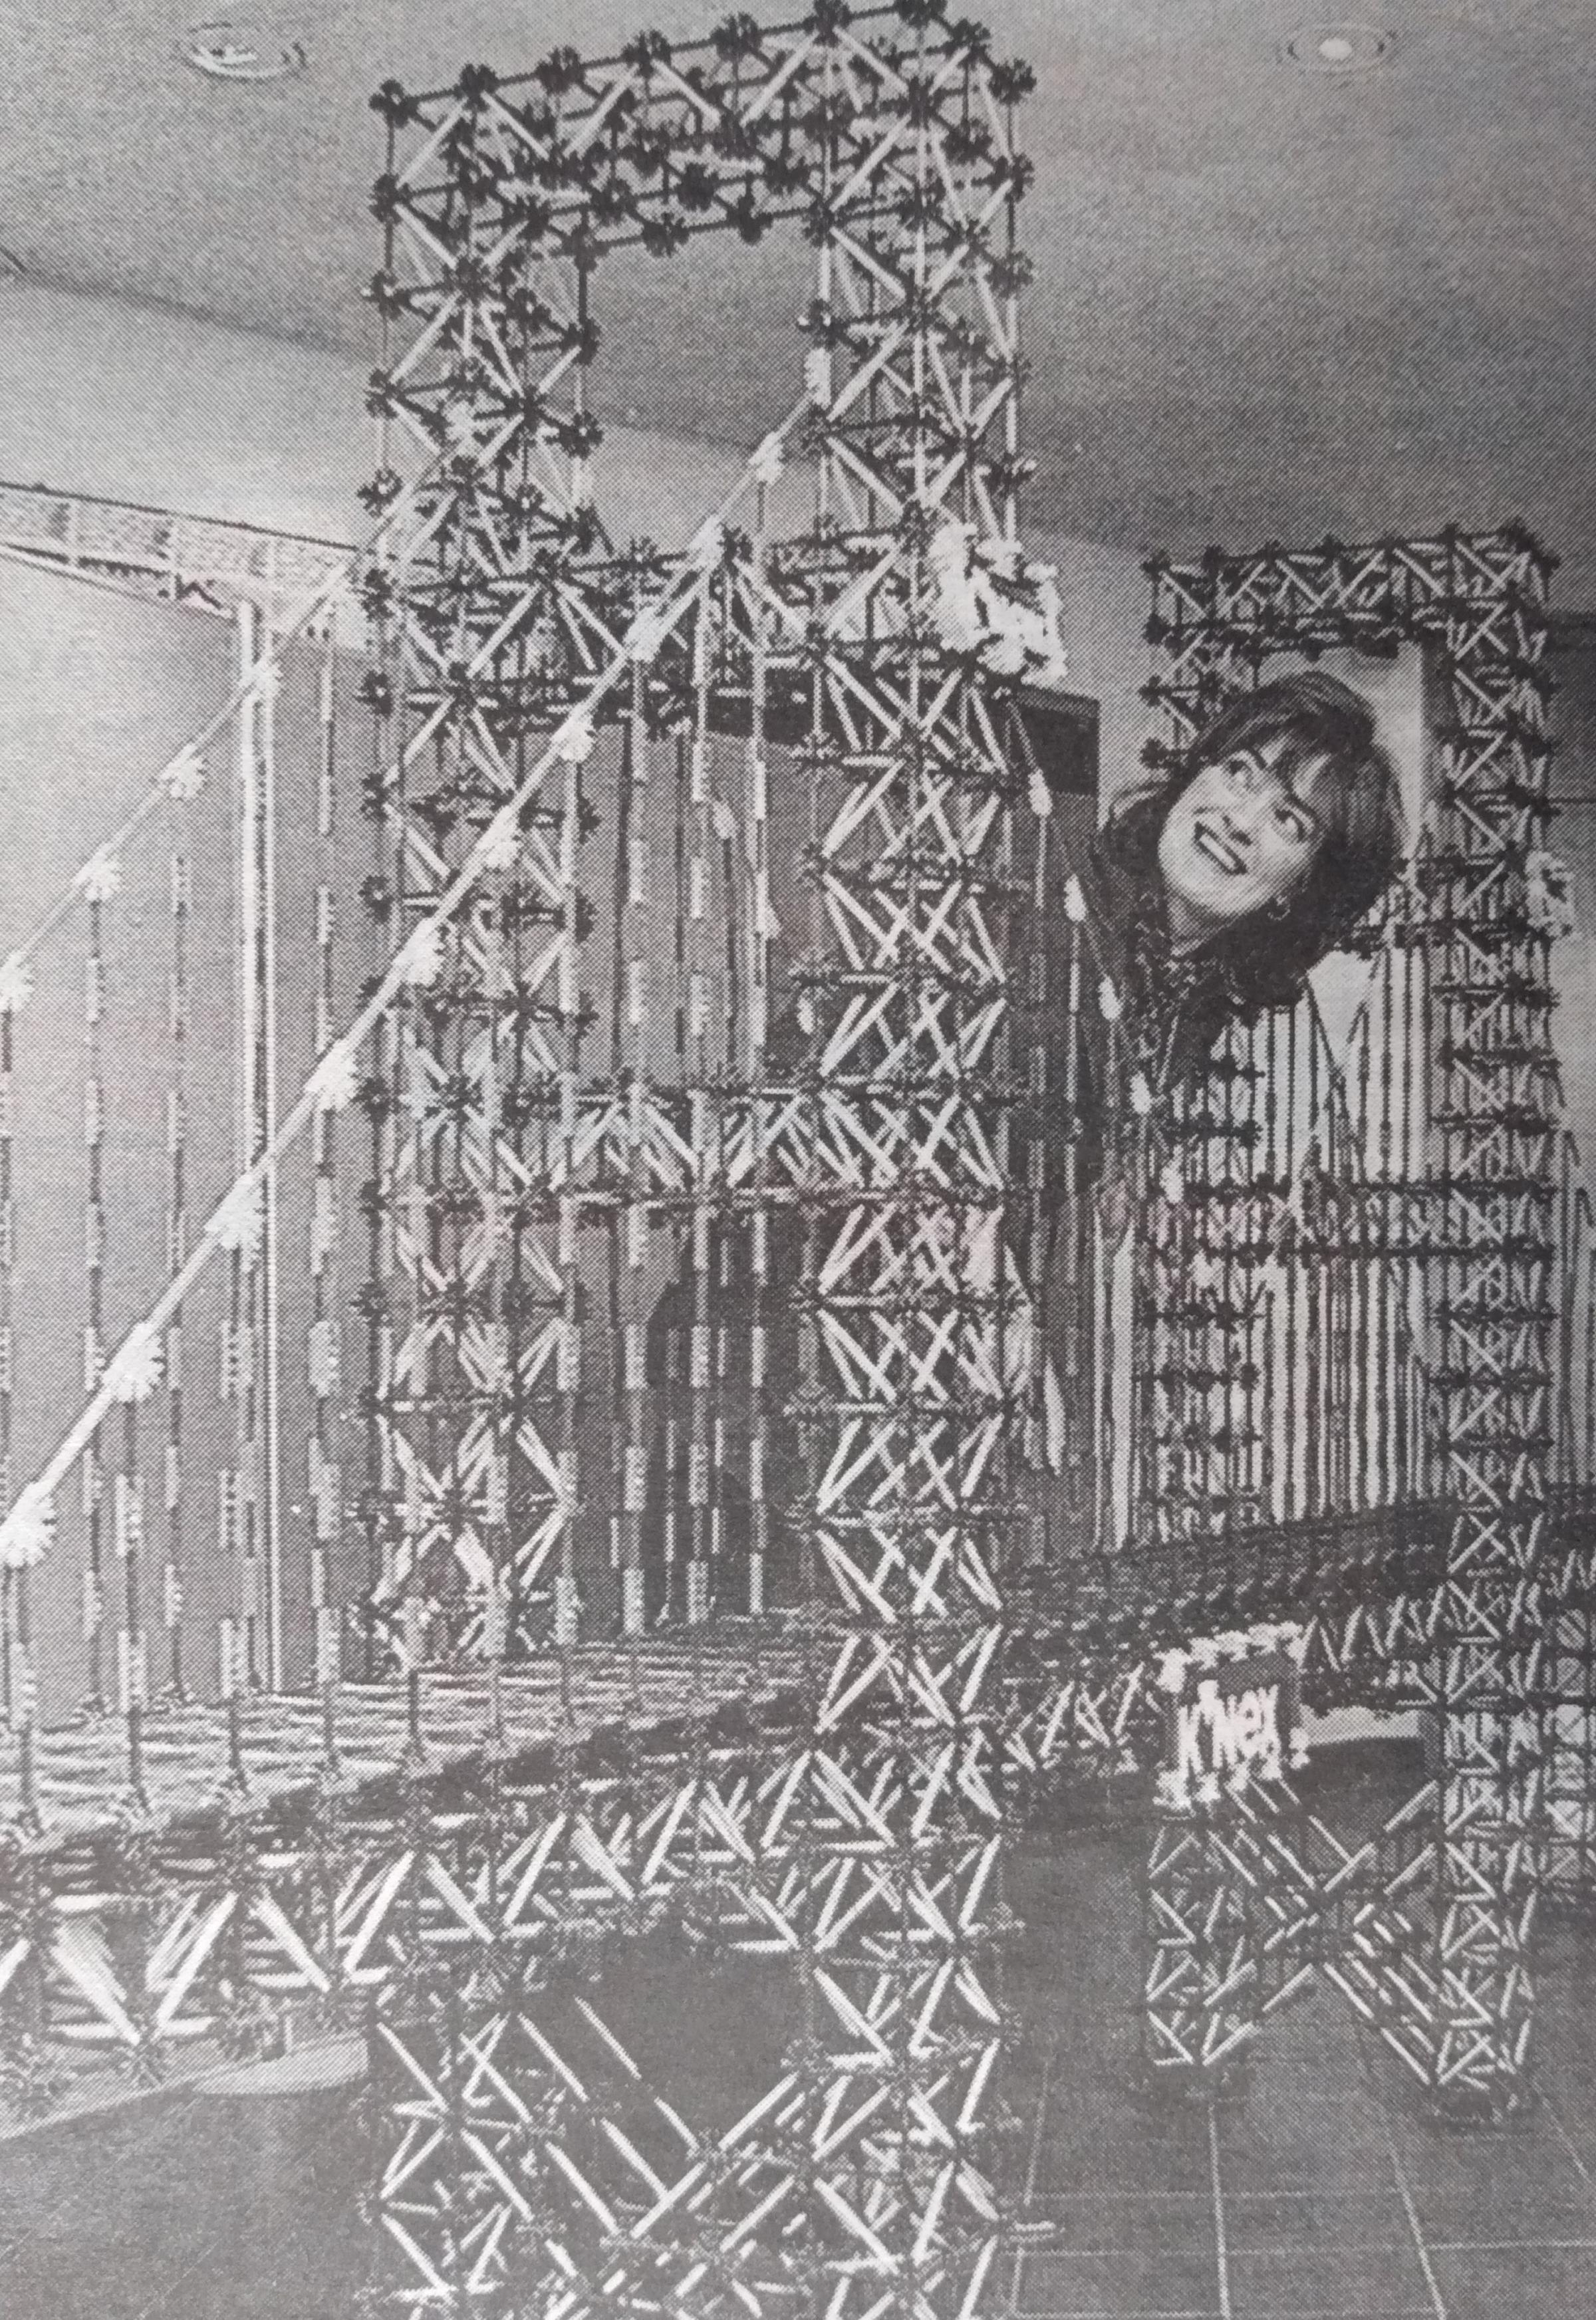 K’Nex is still on the go these days but was huge in the 1990s. Evesham librarian Lynda Downs is dwarfed by a 10ft wide model of the Golden Gate Bridge. Library users were being asked to guess how many pieces were involved in its construction